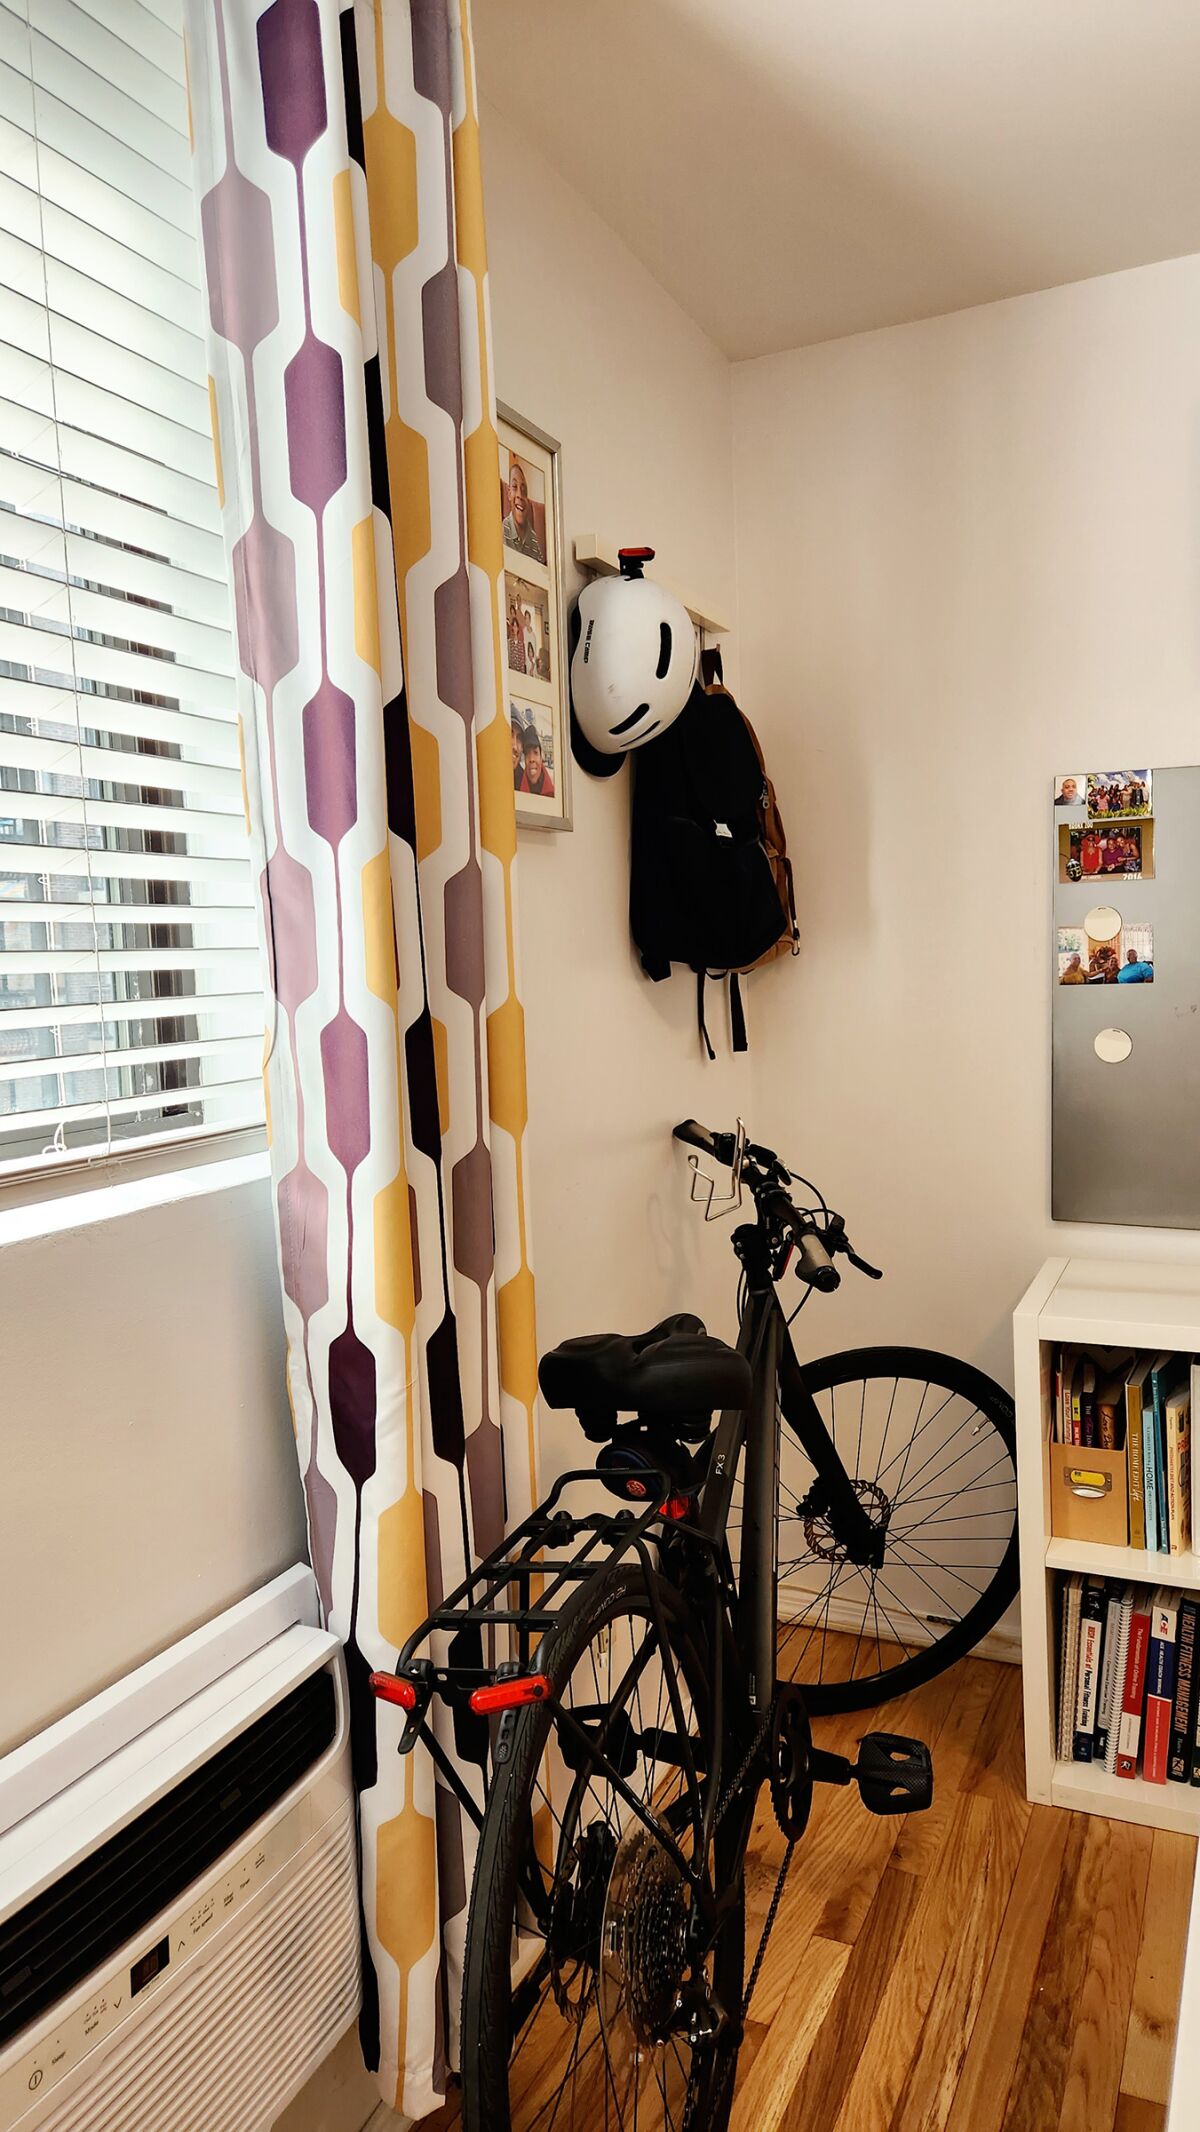 A bike is stored in the corner of a boy's bedroom, where it fits with the decor.